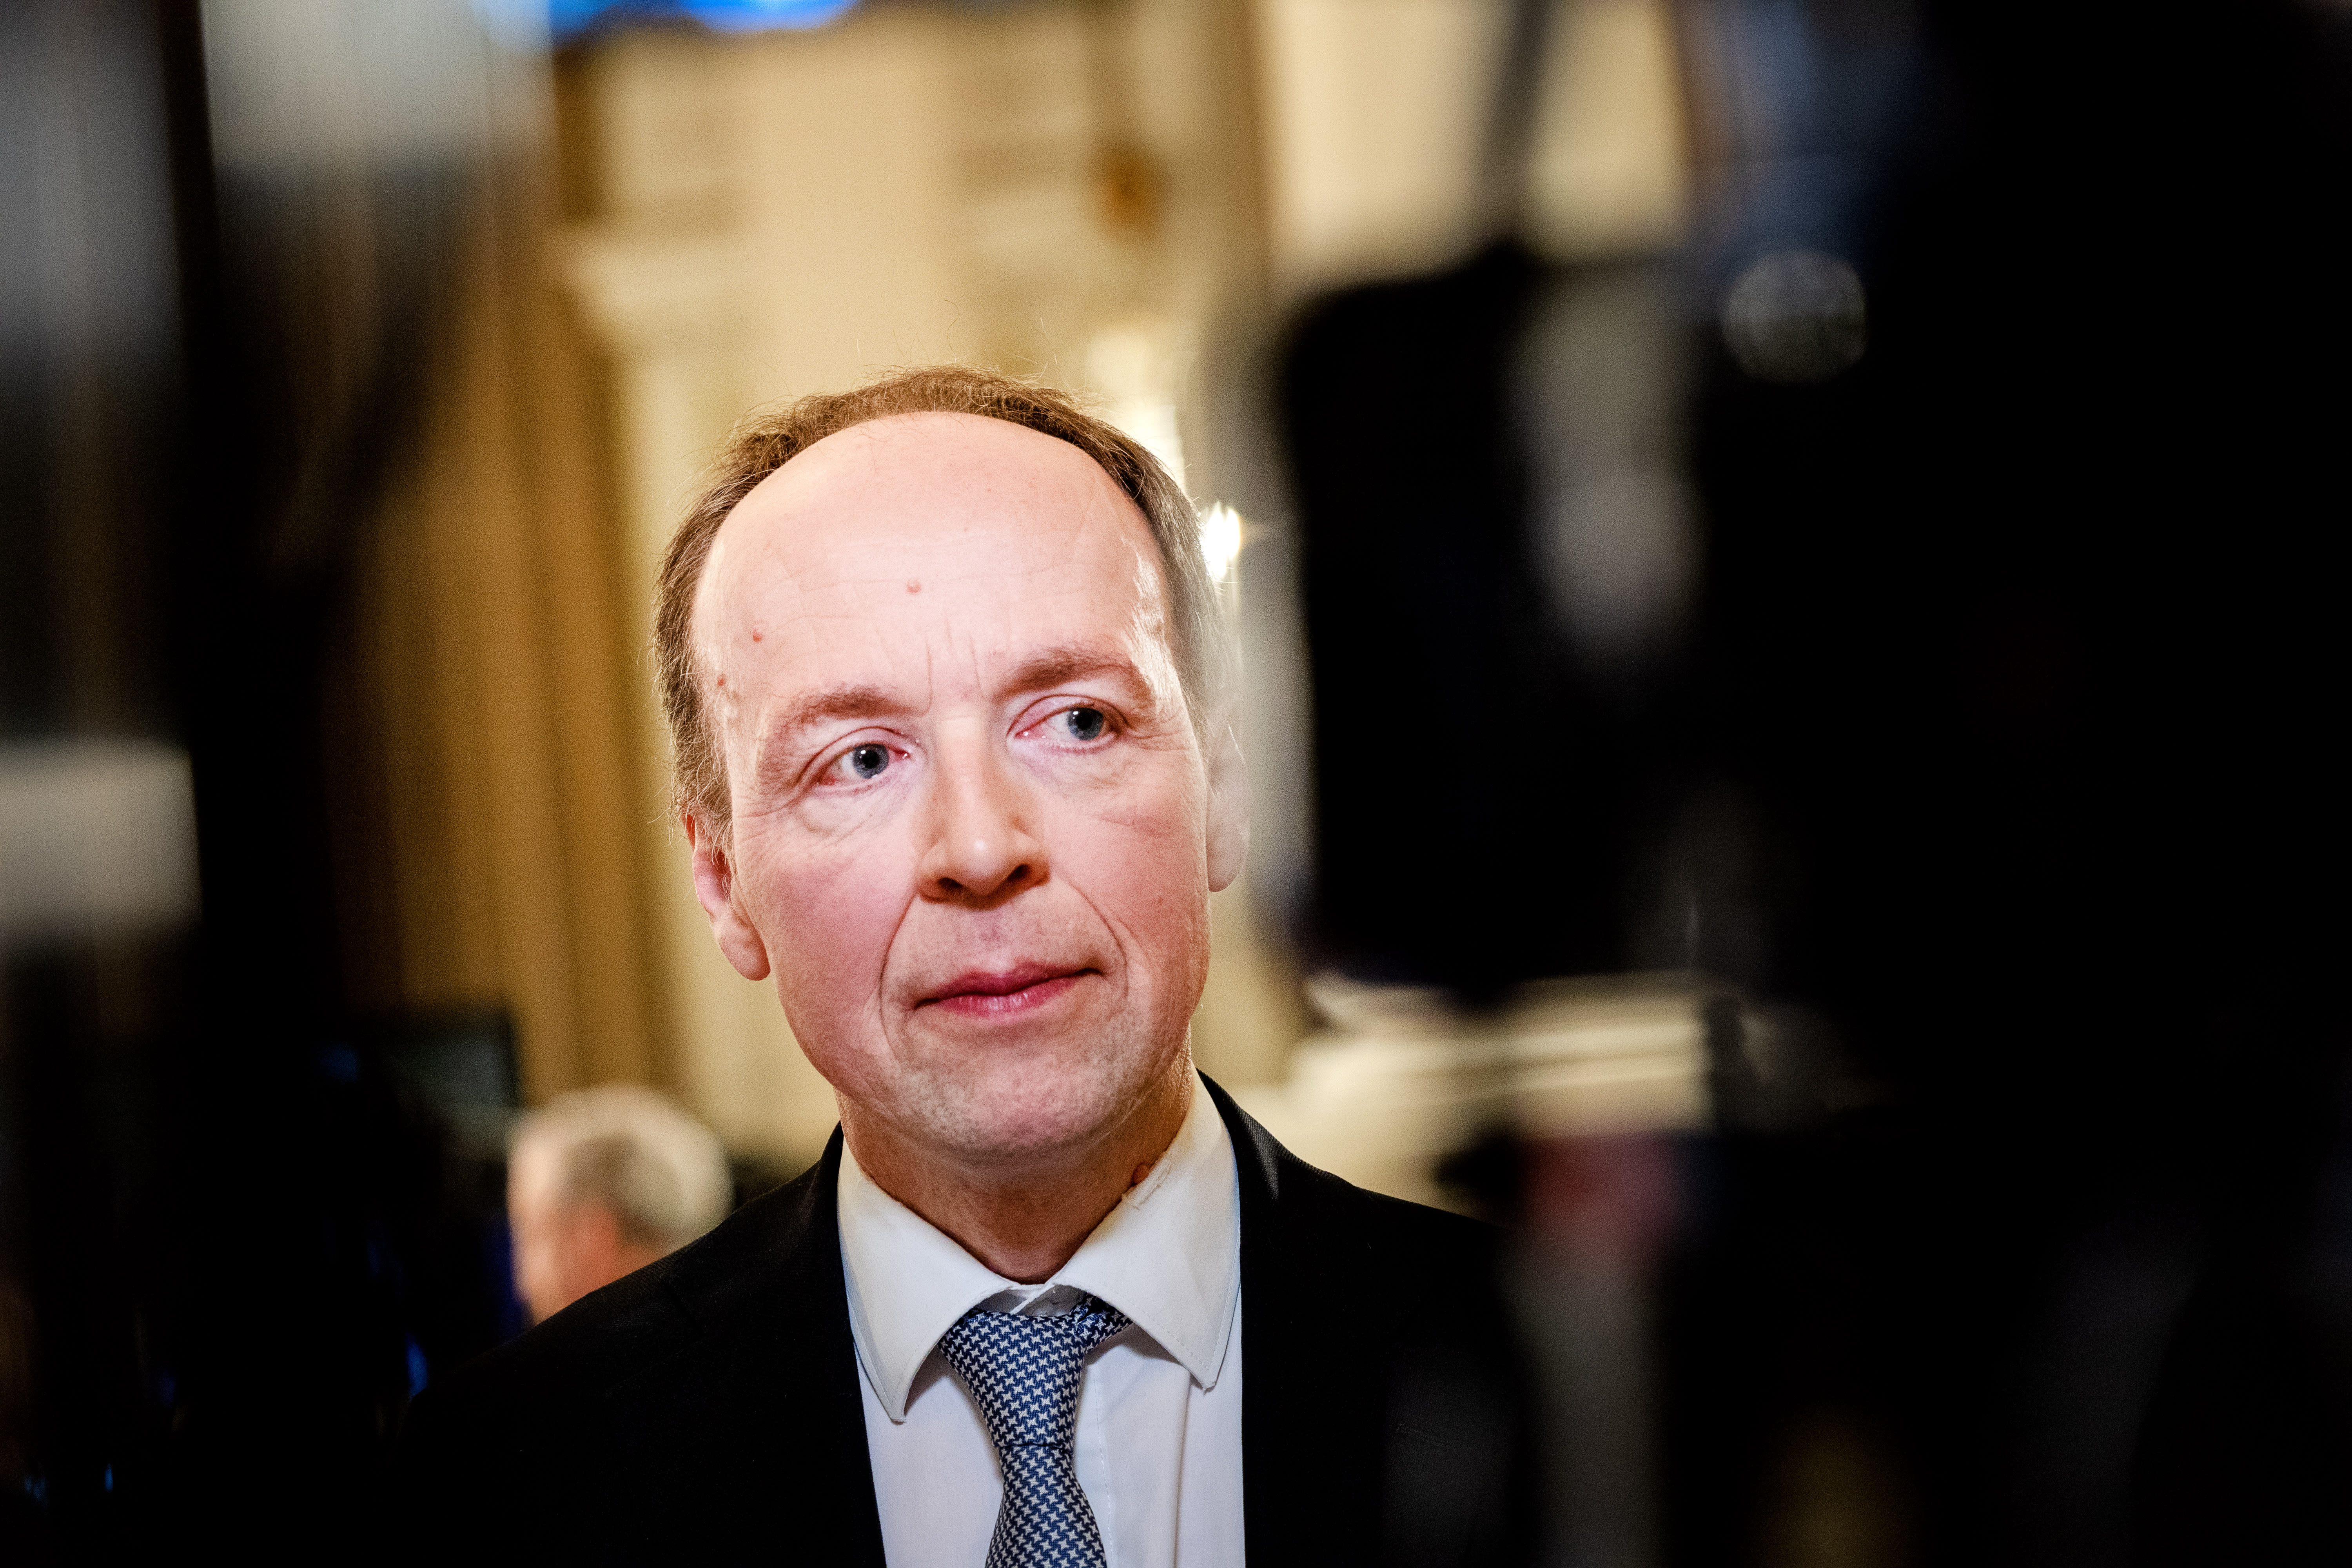 Halla-aho of the fundamental Finns retains the role of speaker of the parliament despite the protest votes